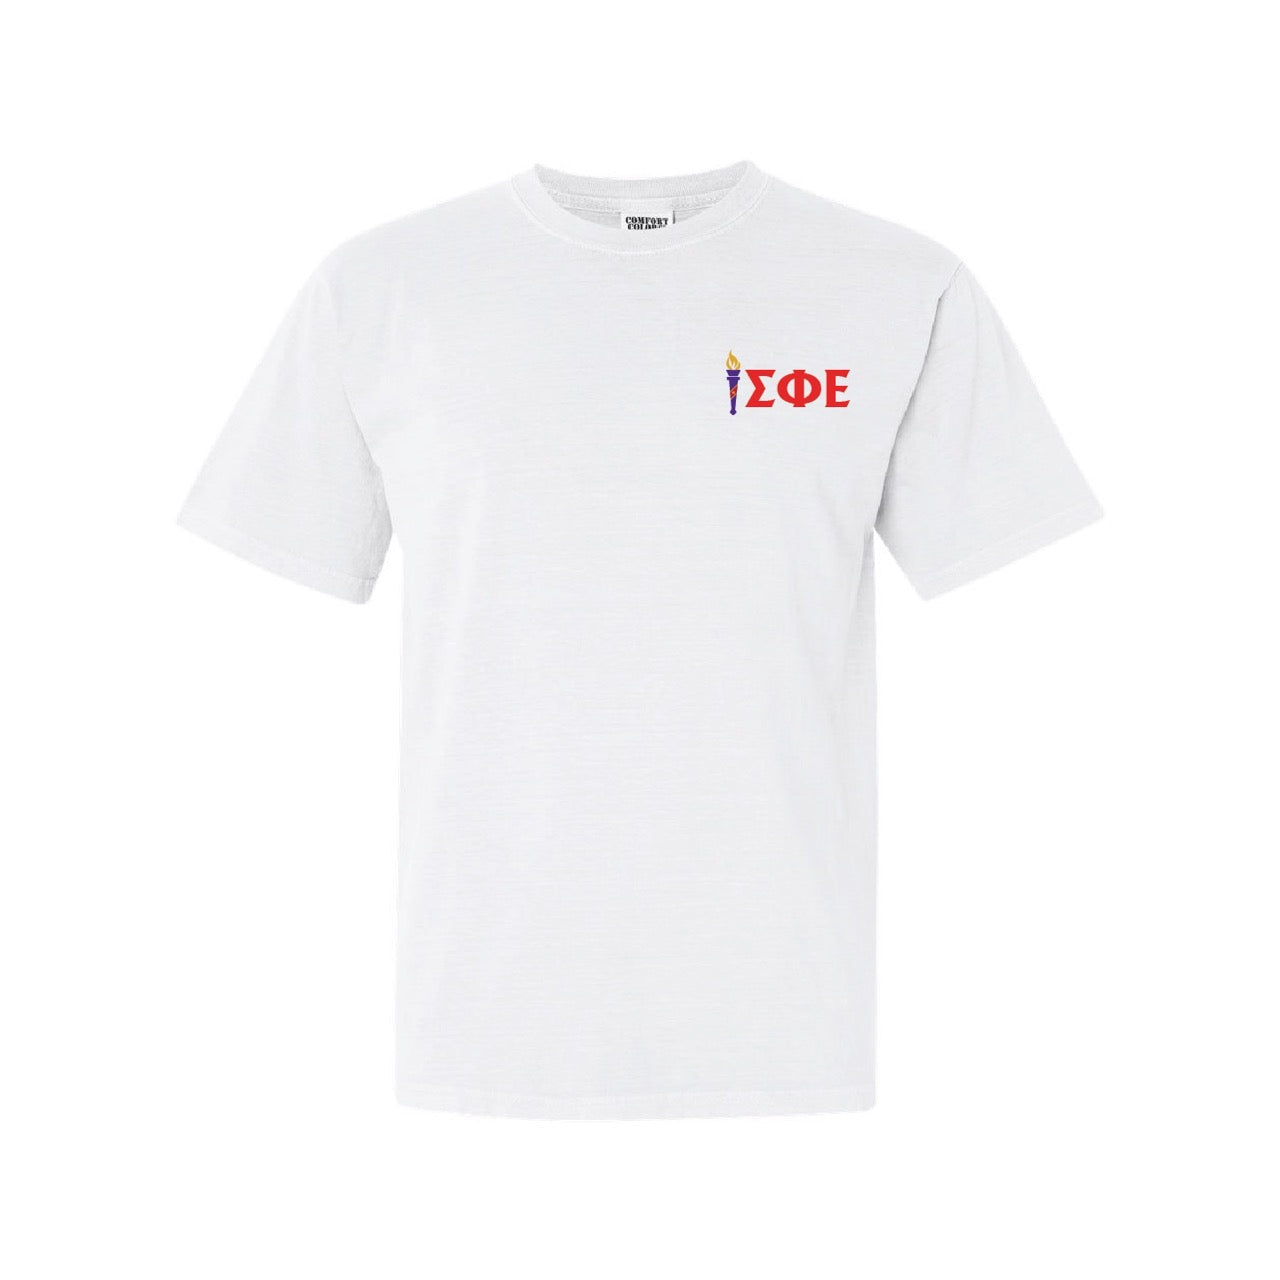 LIMITED PRE-ORDER: Team SigEp T-Shirt by Comfort Colors